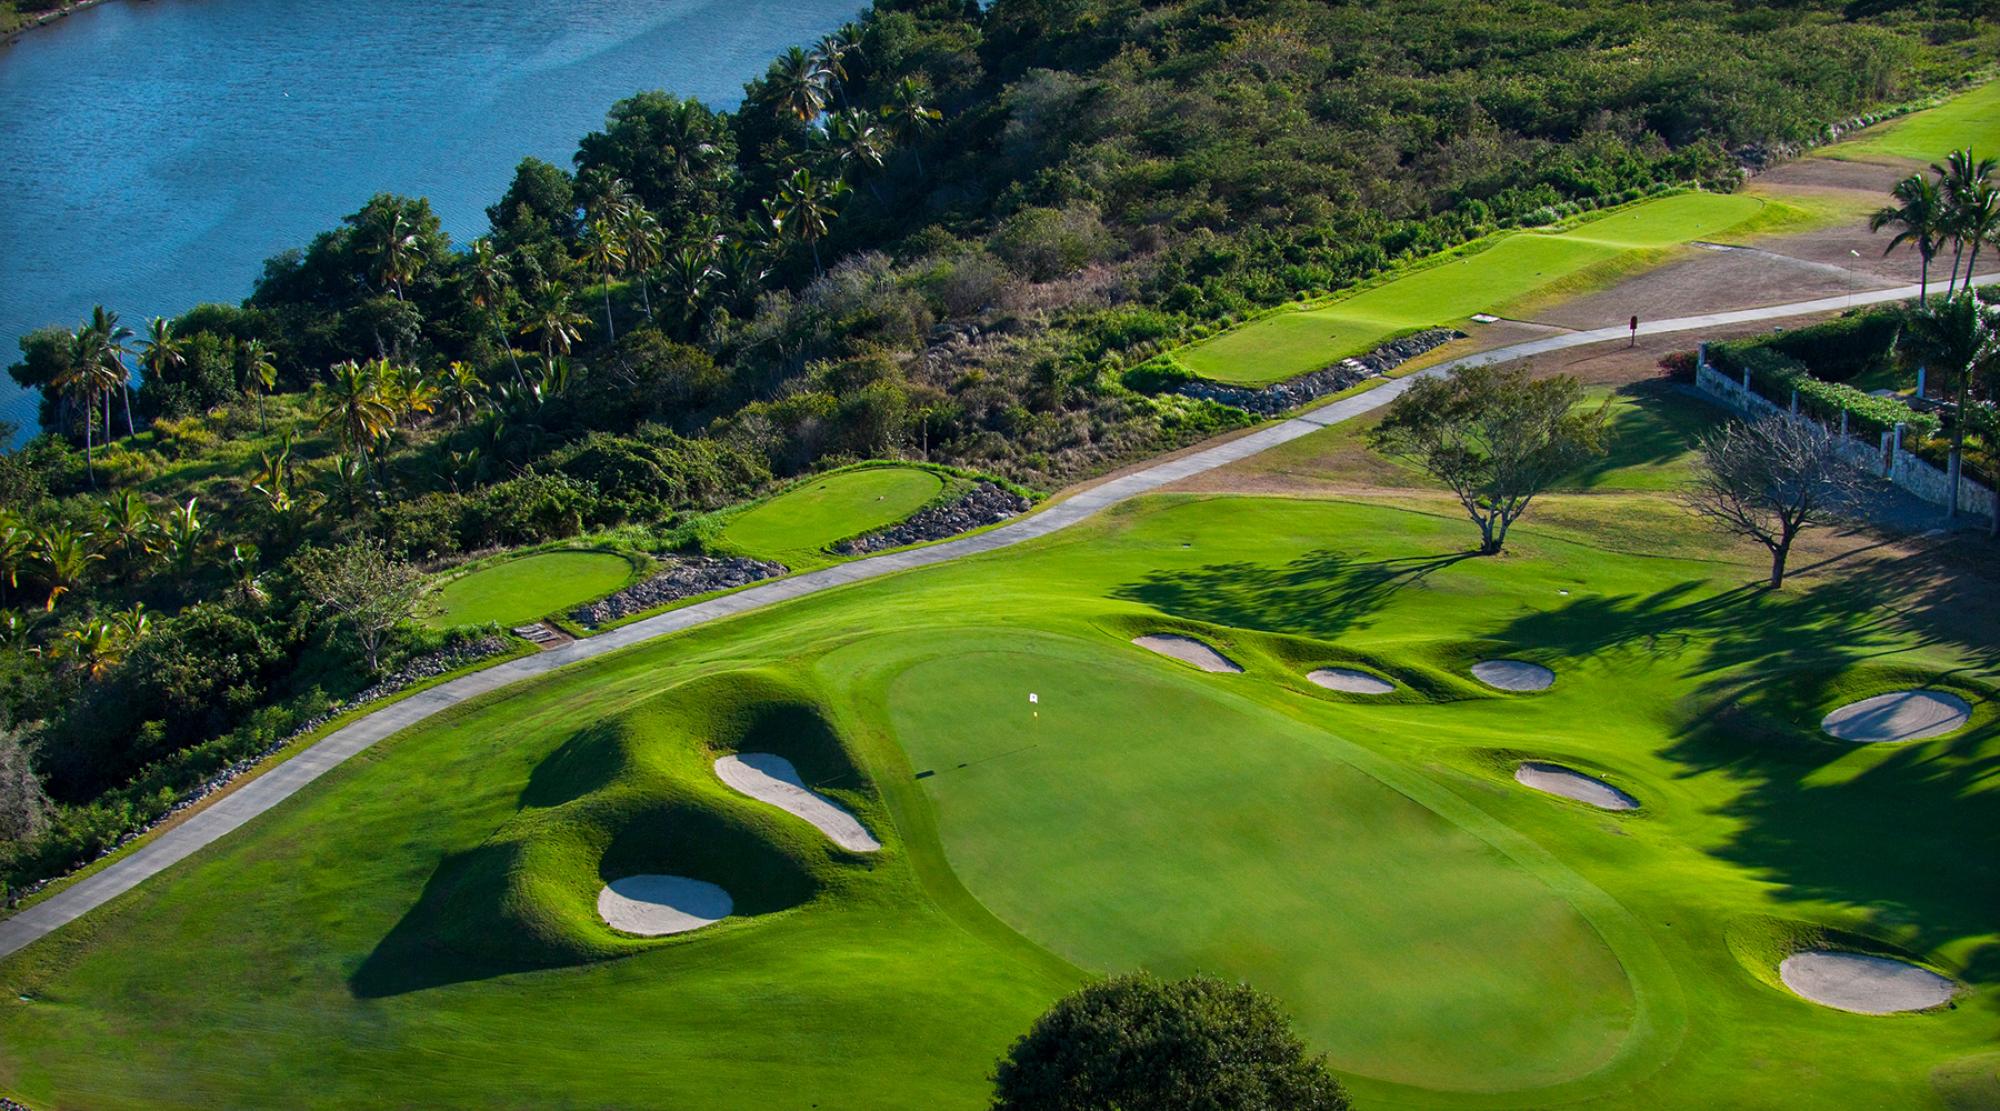 The Casa De Campo Golf - Dye Fore Course's impressive golf course situated in astounding Dominican R